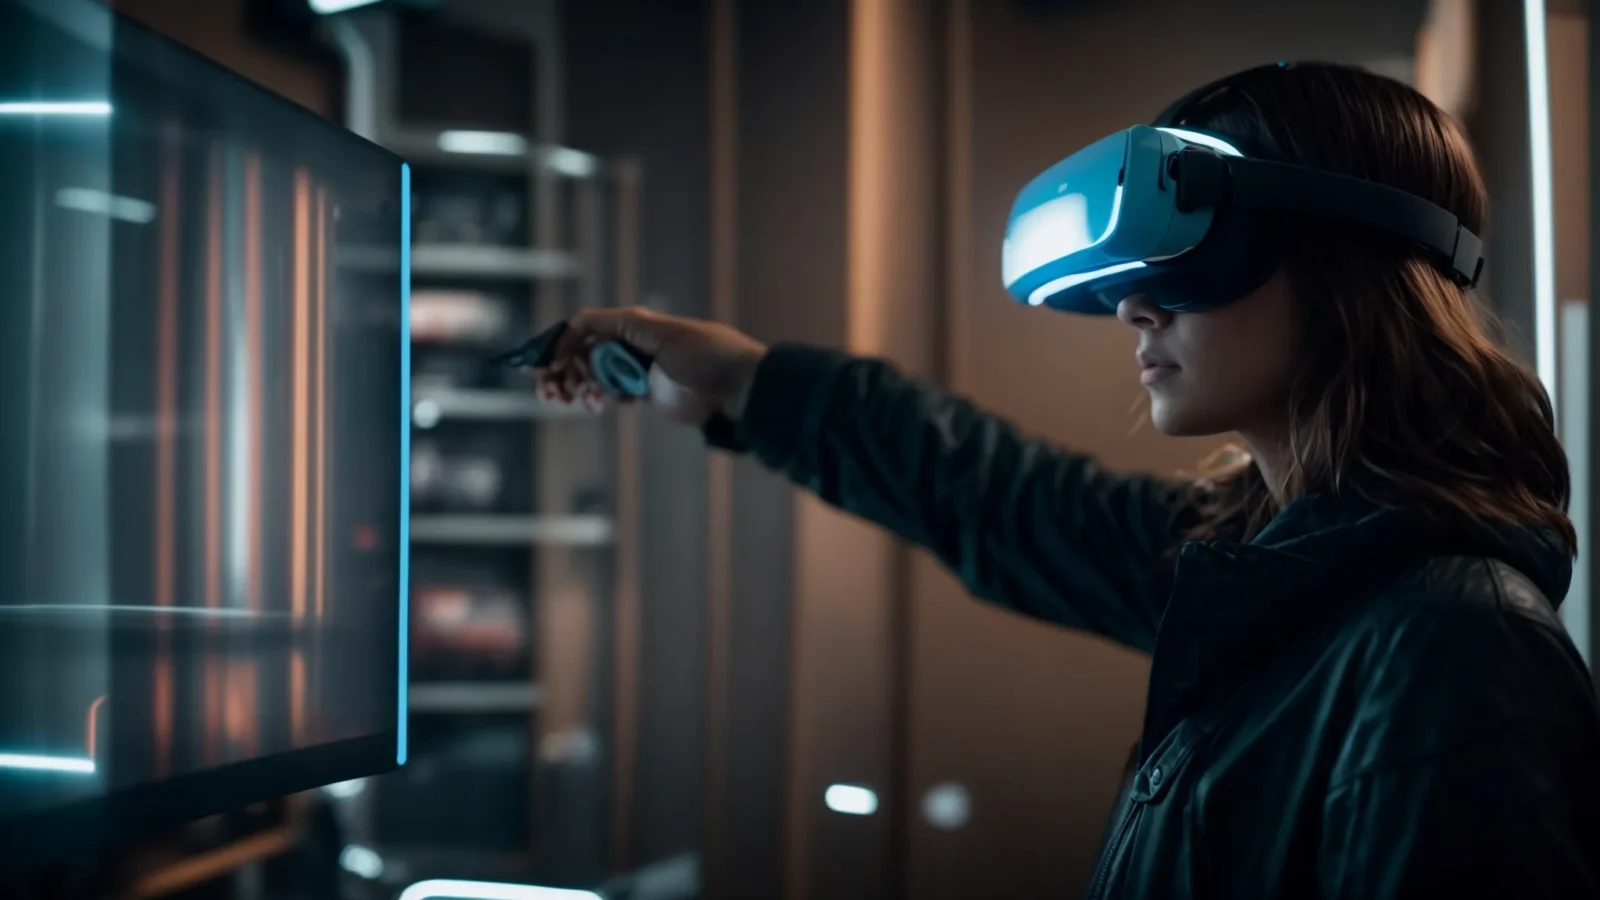 a person wearing a virtual reality headset reaches towards an illuminated digital product display.